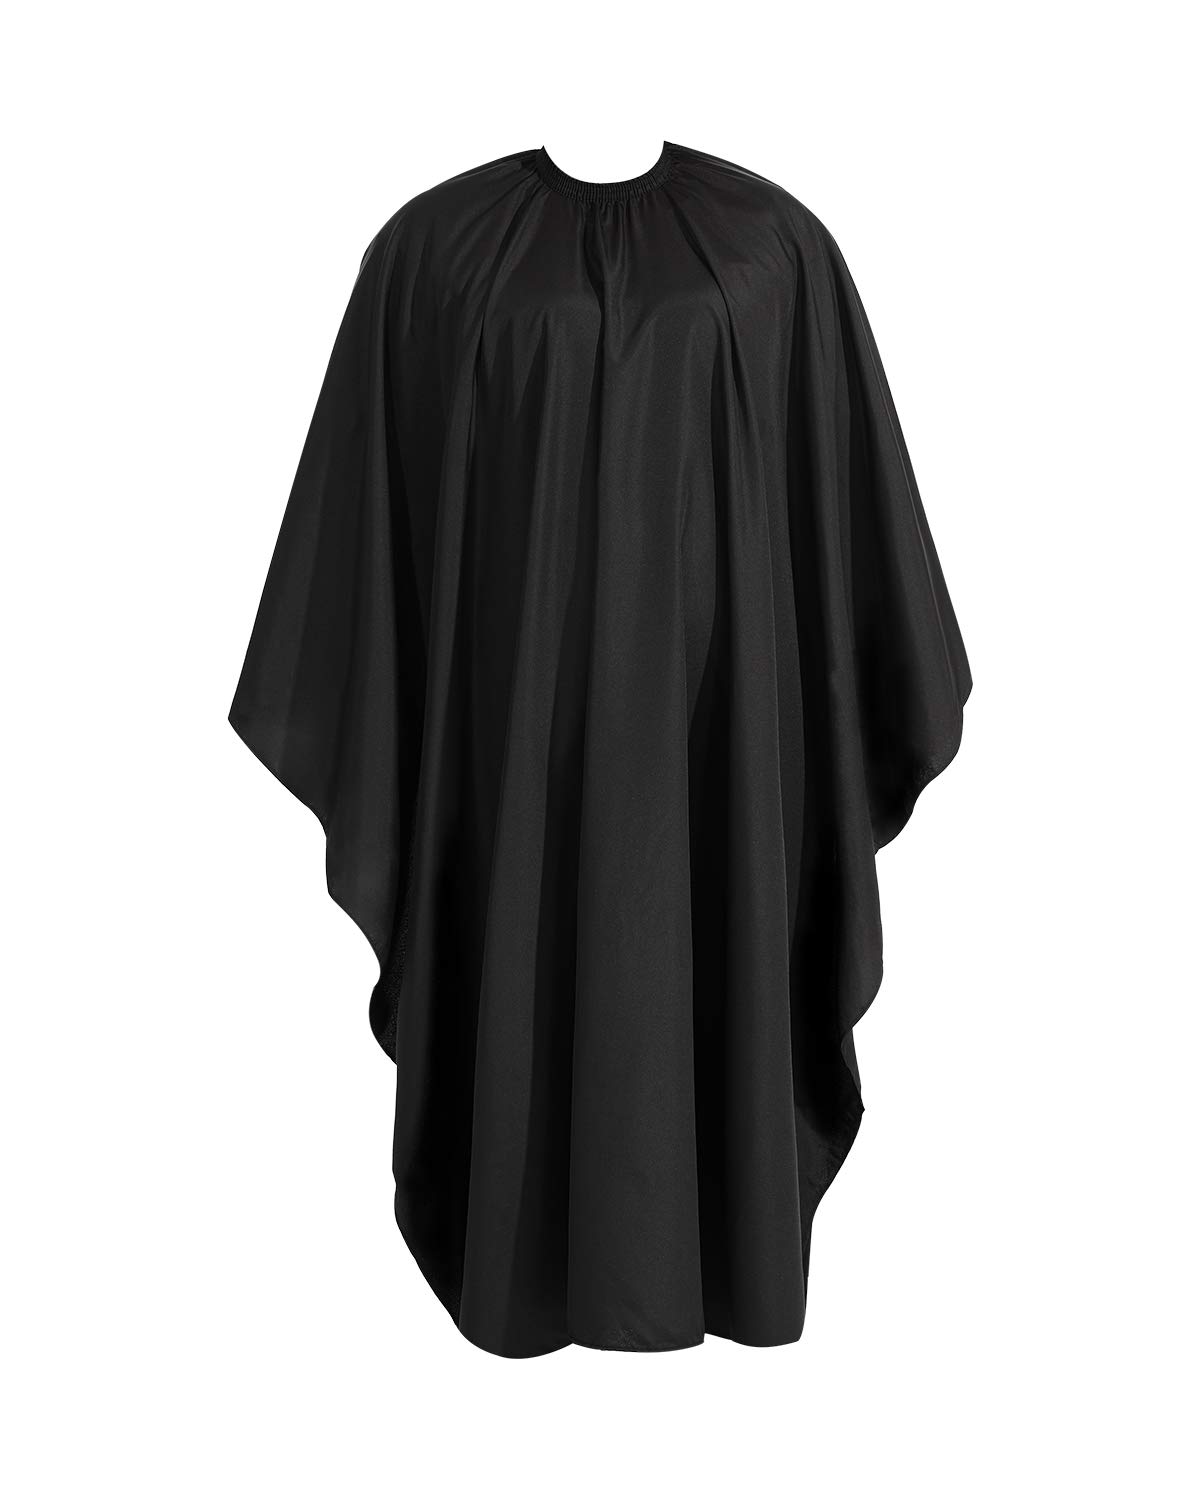 YELEGAI Barber Cape-Professional Salon Hair Cutting Cape,56x63 inches Large  Hairdresser Cape for Haircut,Coloring,Makeup,Styling and More,(Black)